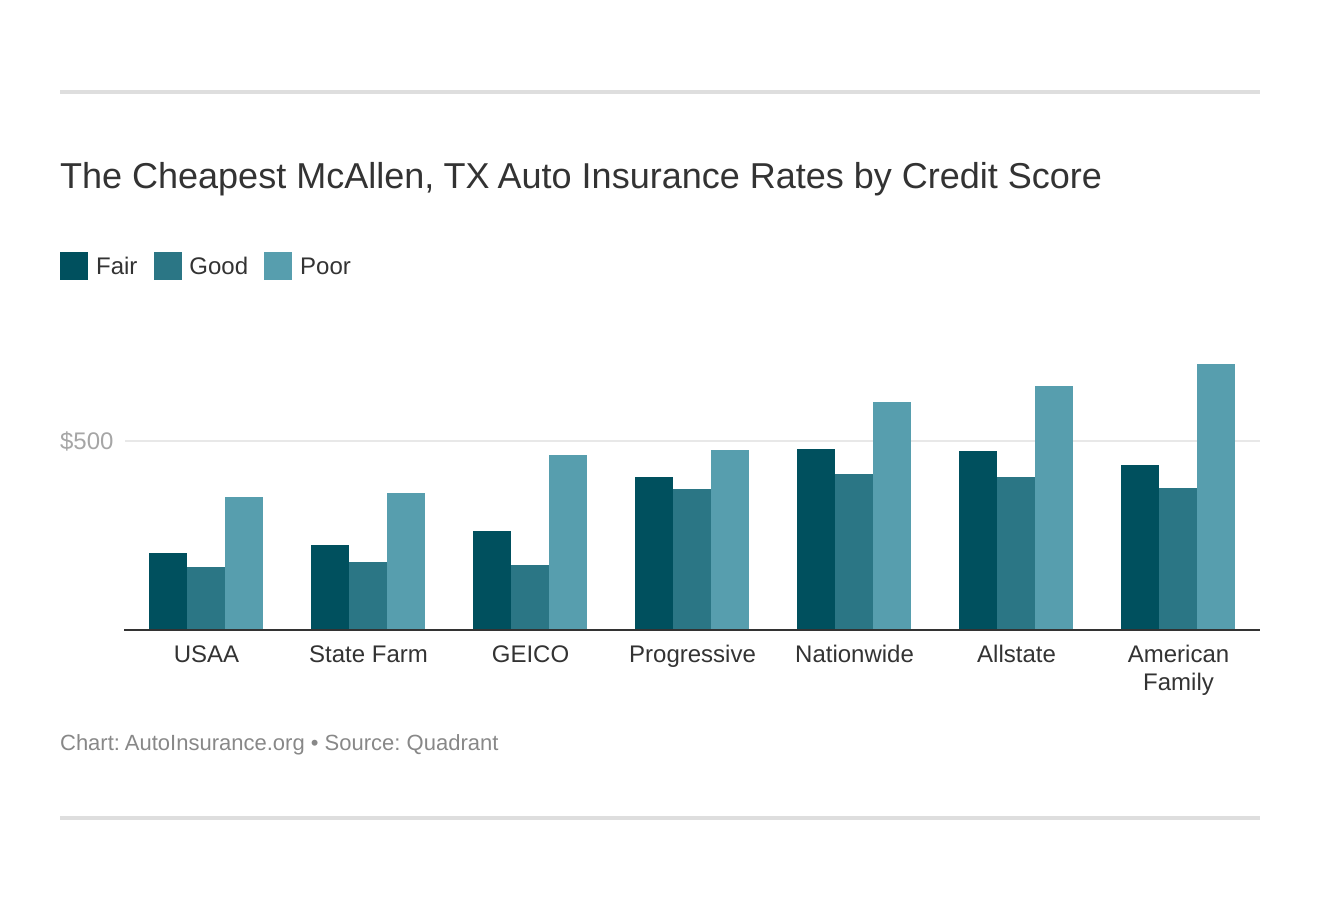 The Cheapest McAllen, TX Auto Insurance Rates by Credit Score